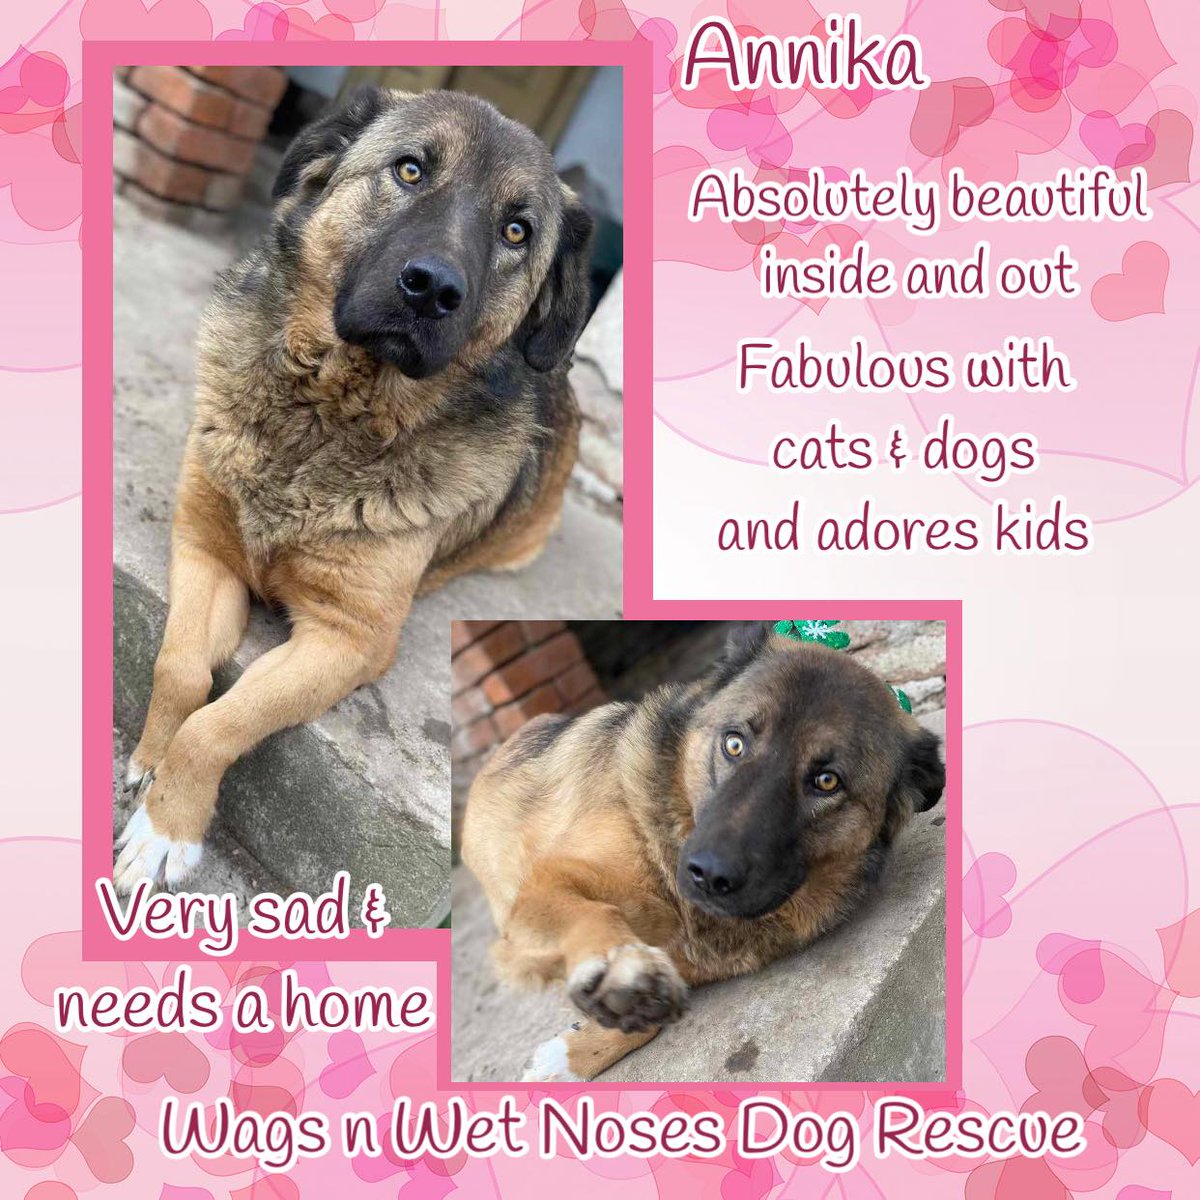 #forgottensoulshour 3yo GSD mix ANNIKA is a big, gentle teddy bear, very cuddly & loyal. Her fur is as soft as silk & her eyes sparkle with kindness. She is the size of a Bernese with a heart just as big. She lives in a shelter, surrounded by other dogs who are all longing for a